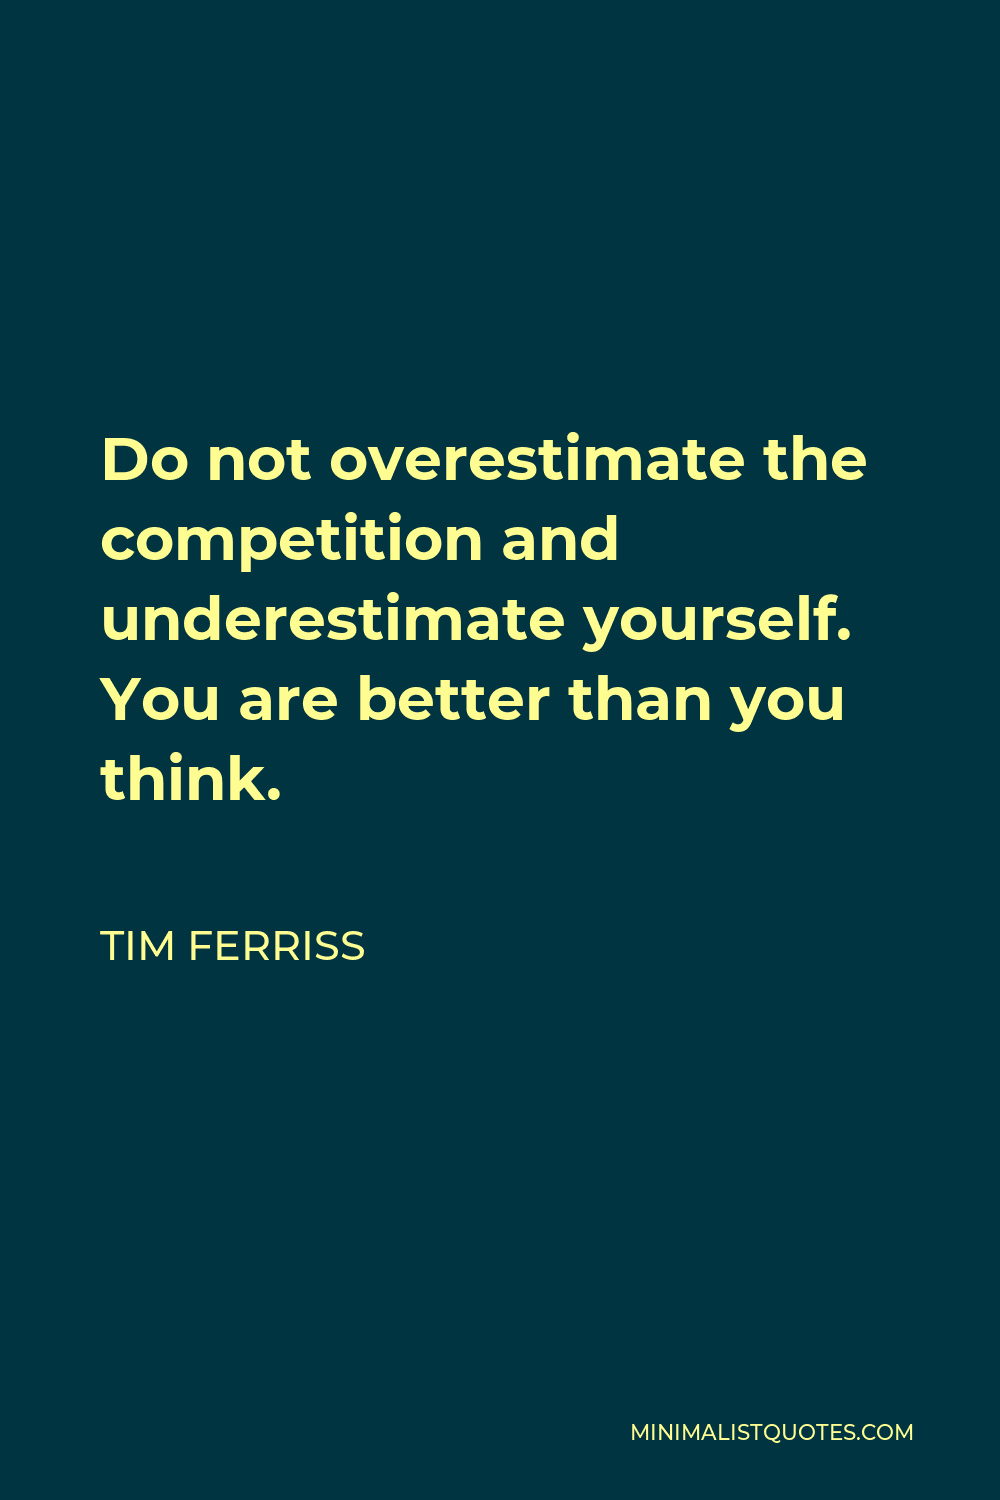 Tim Ferriss Quote - Do not overestimate the competition and underestimate yourself. You are better than you think.